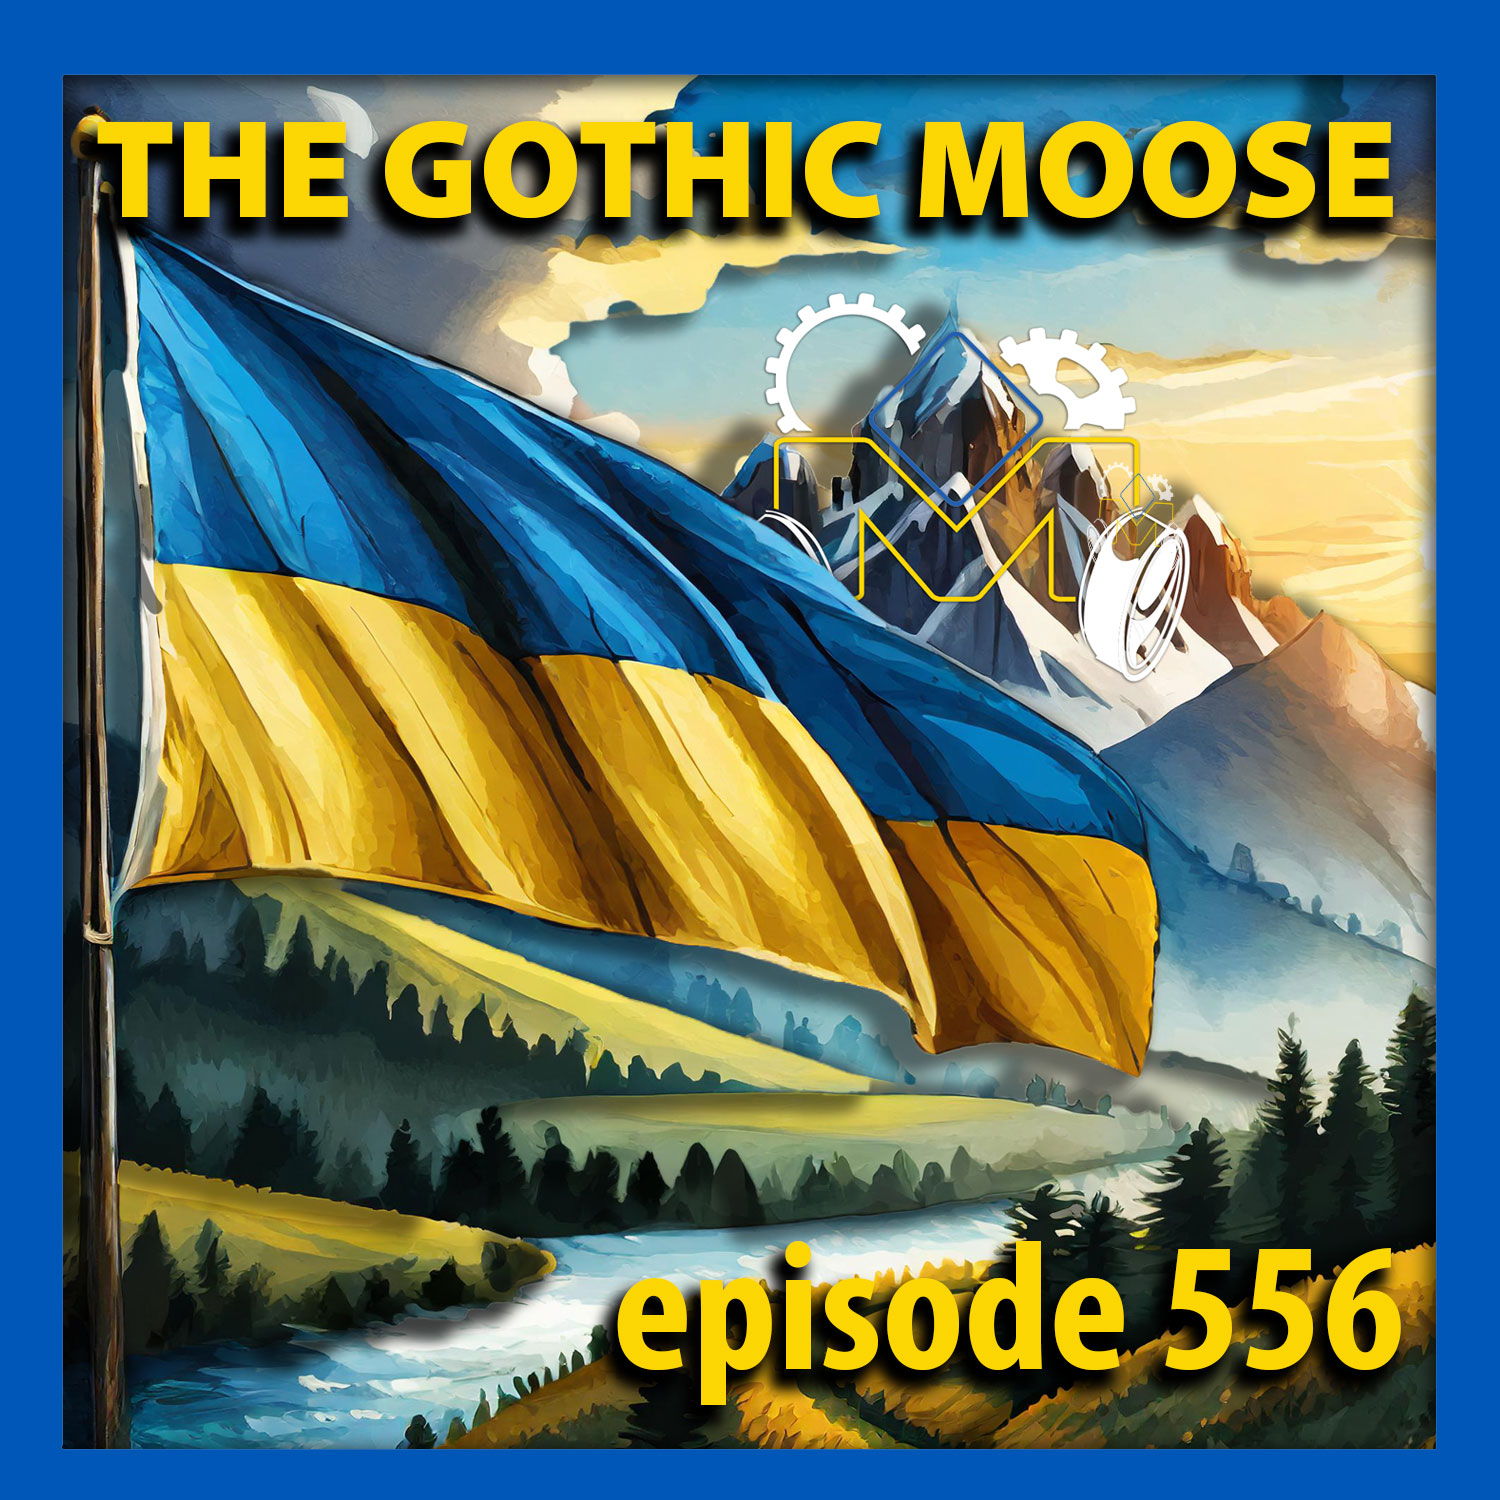 The Gothic Moose – Episode 556 – All Ukrainian bands or bands supporting Ukraine